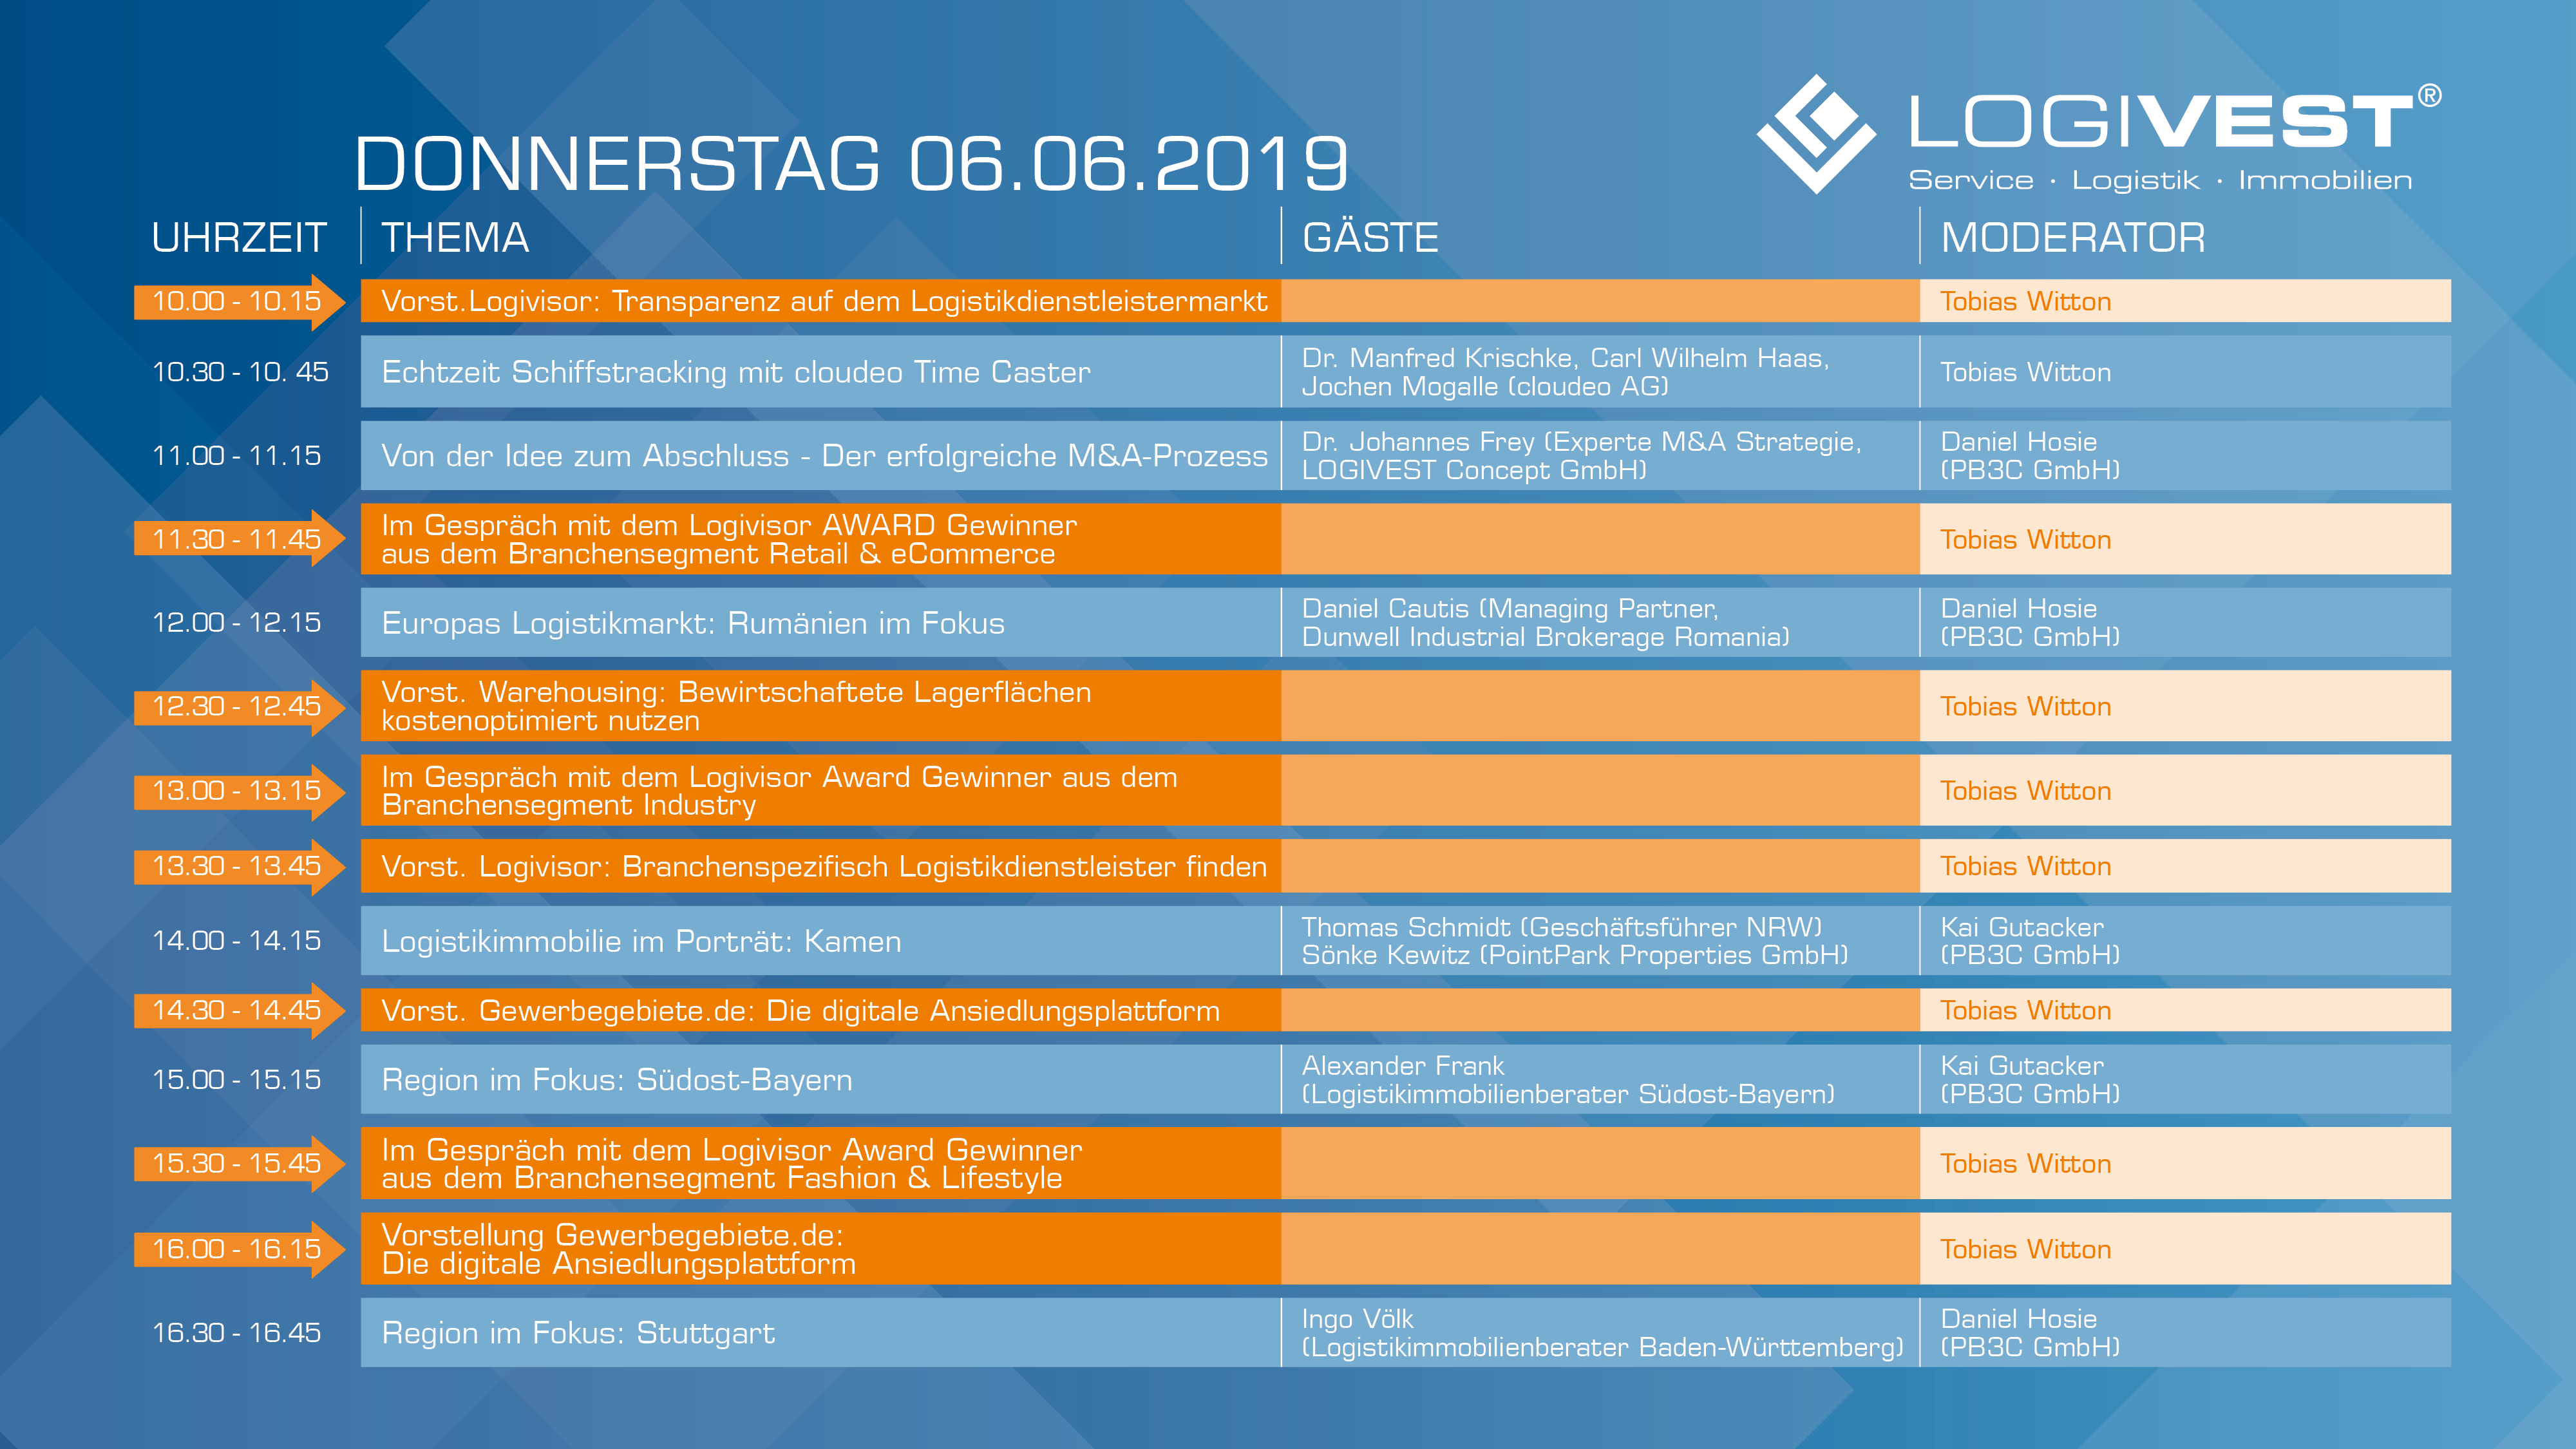 Donnerstag, 06.06.2019